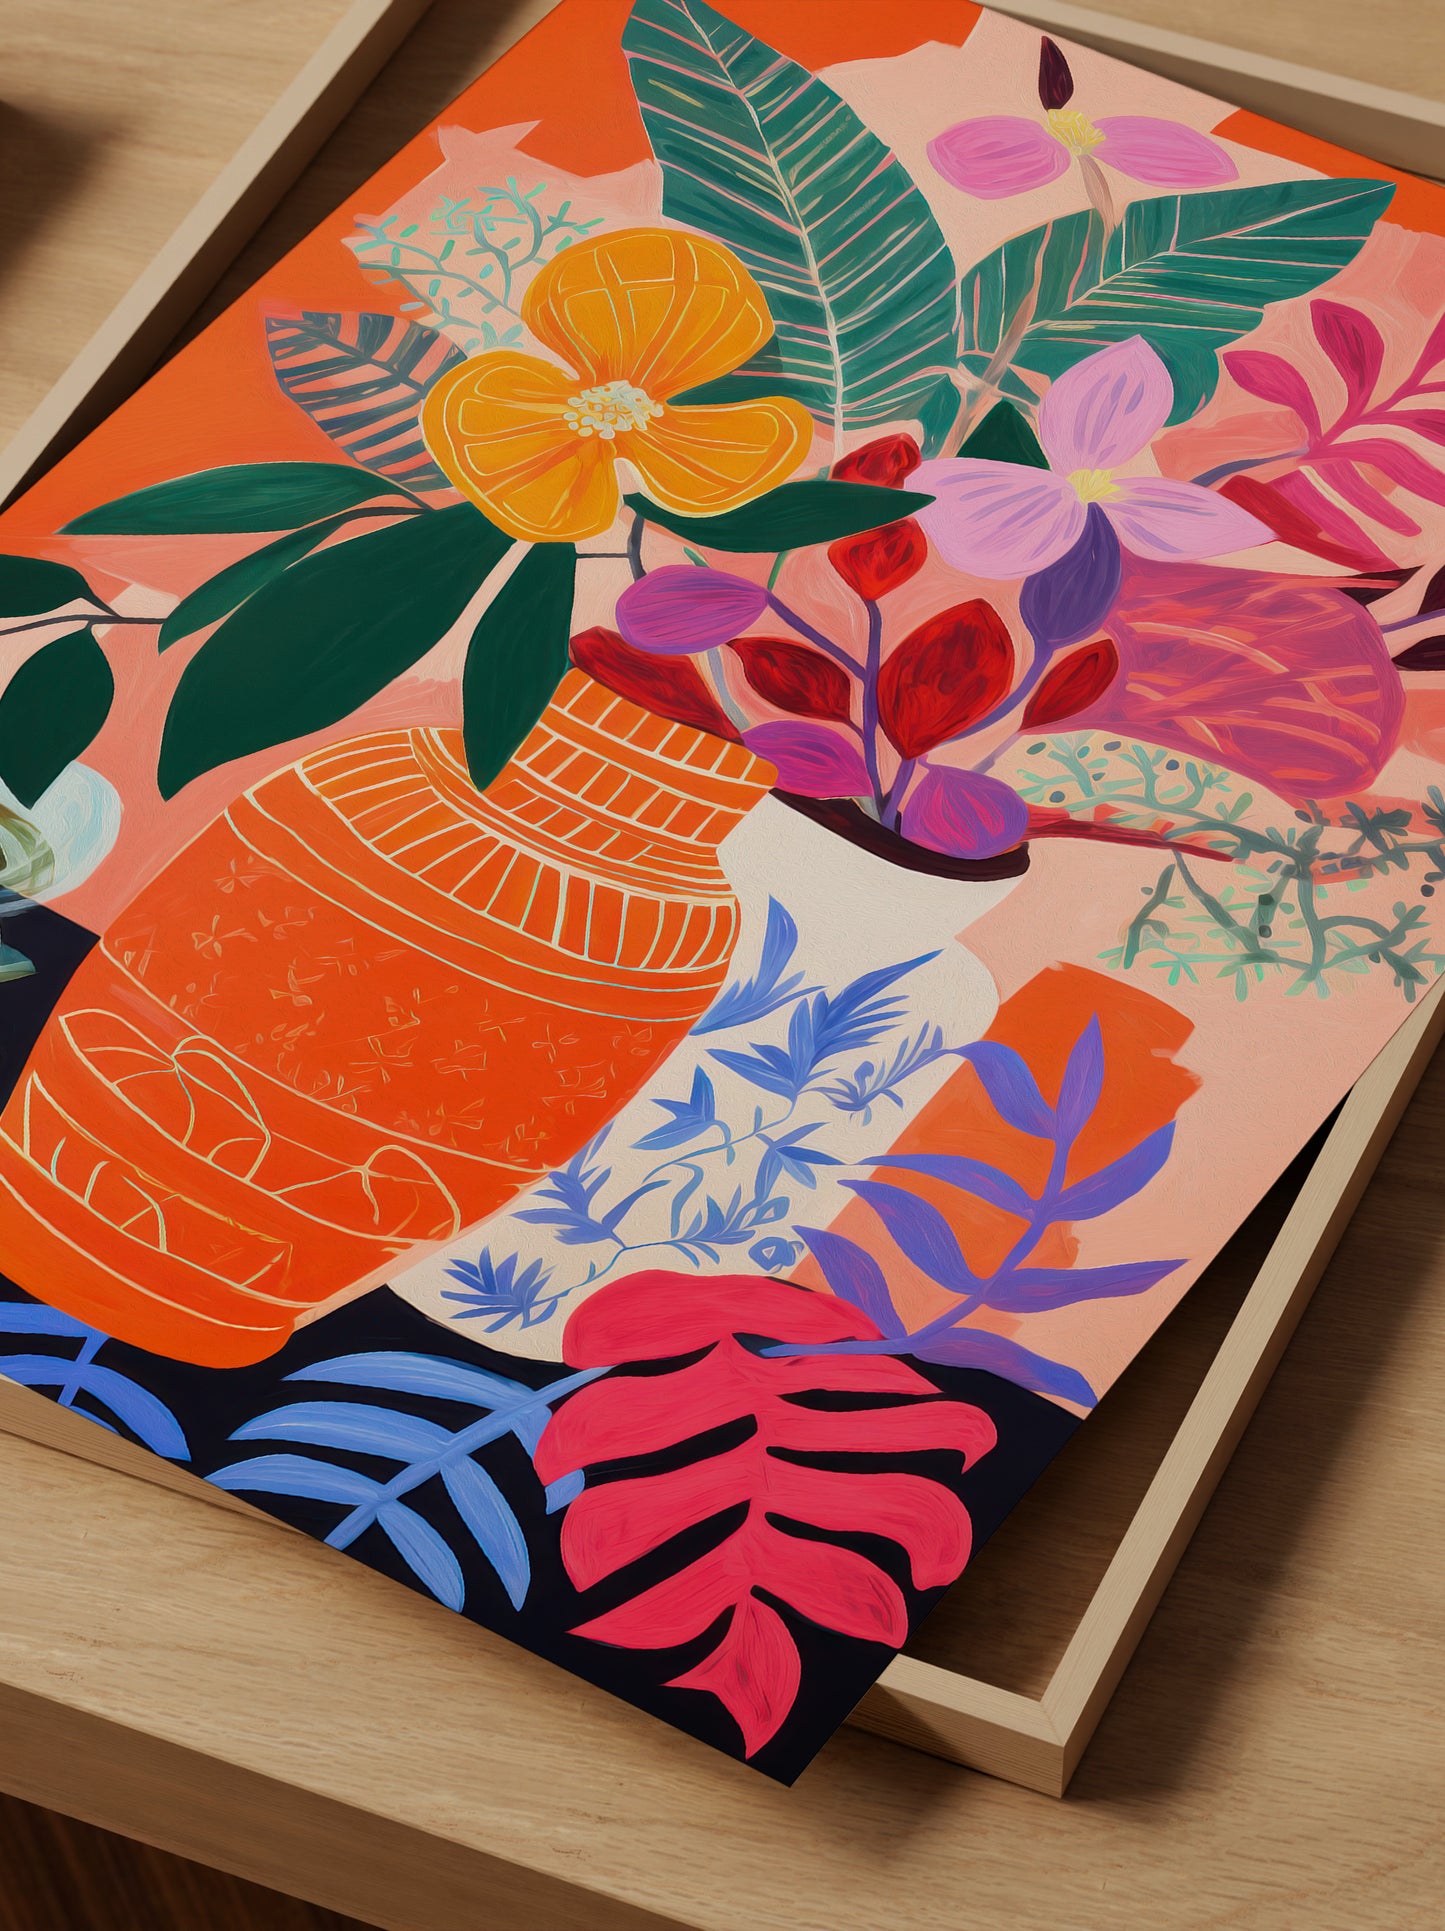 Colourful Floral Still Life Print